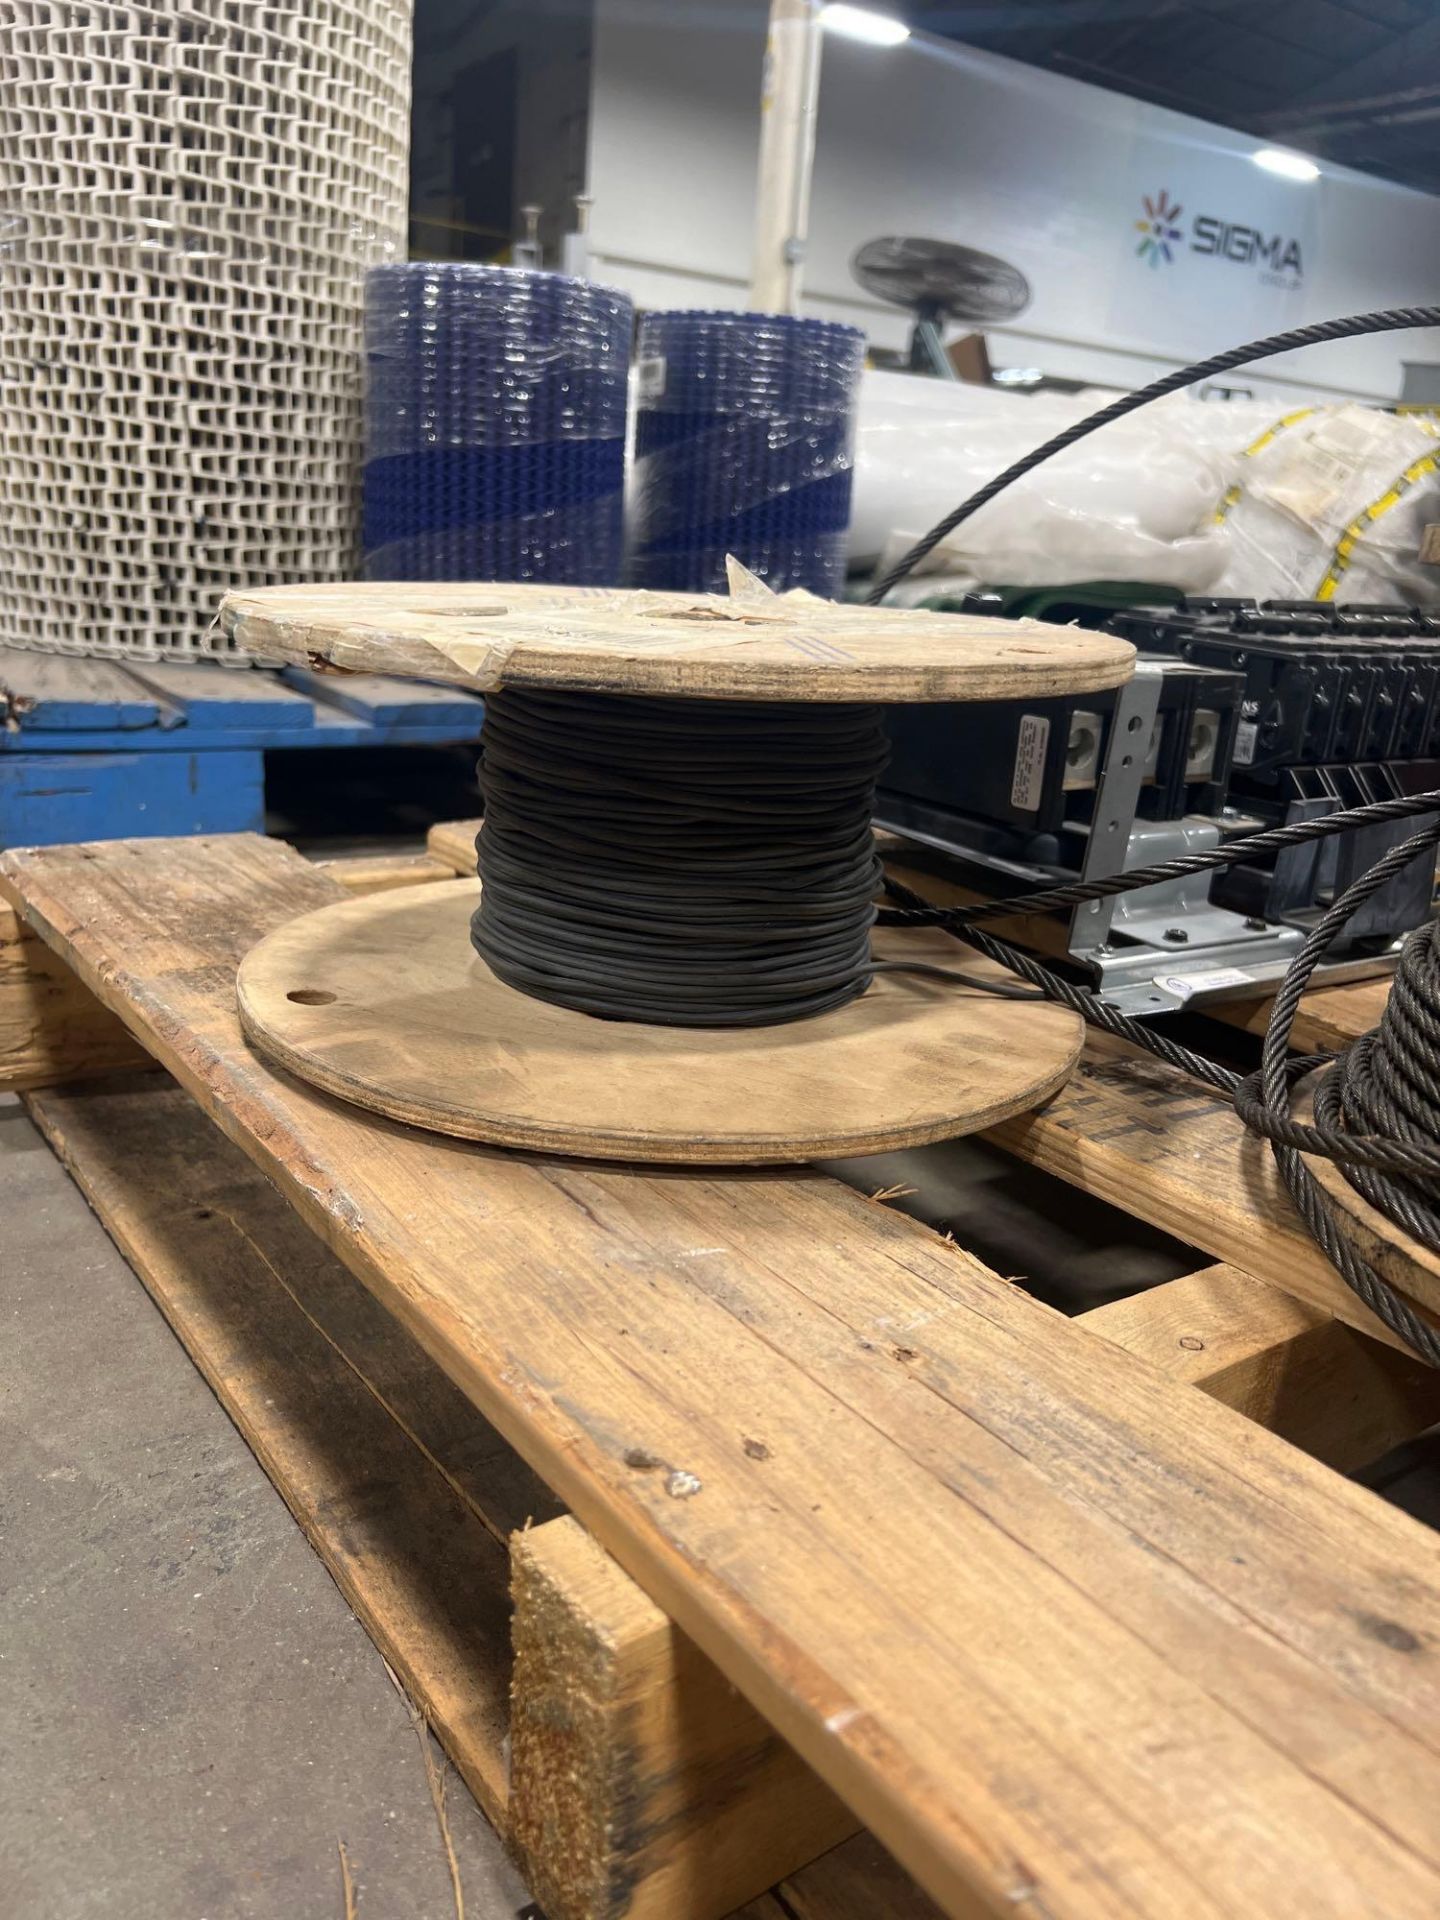 pallet of cable spools - Image 9 of 9